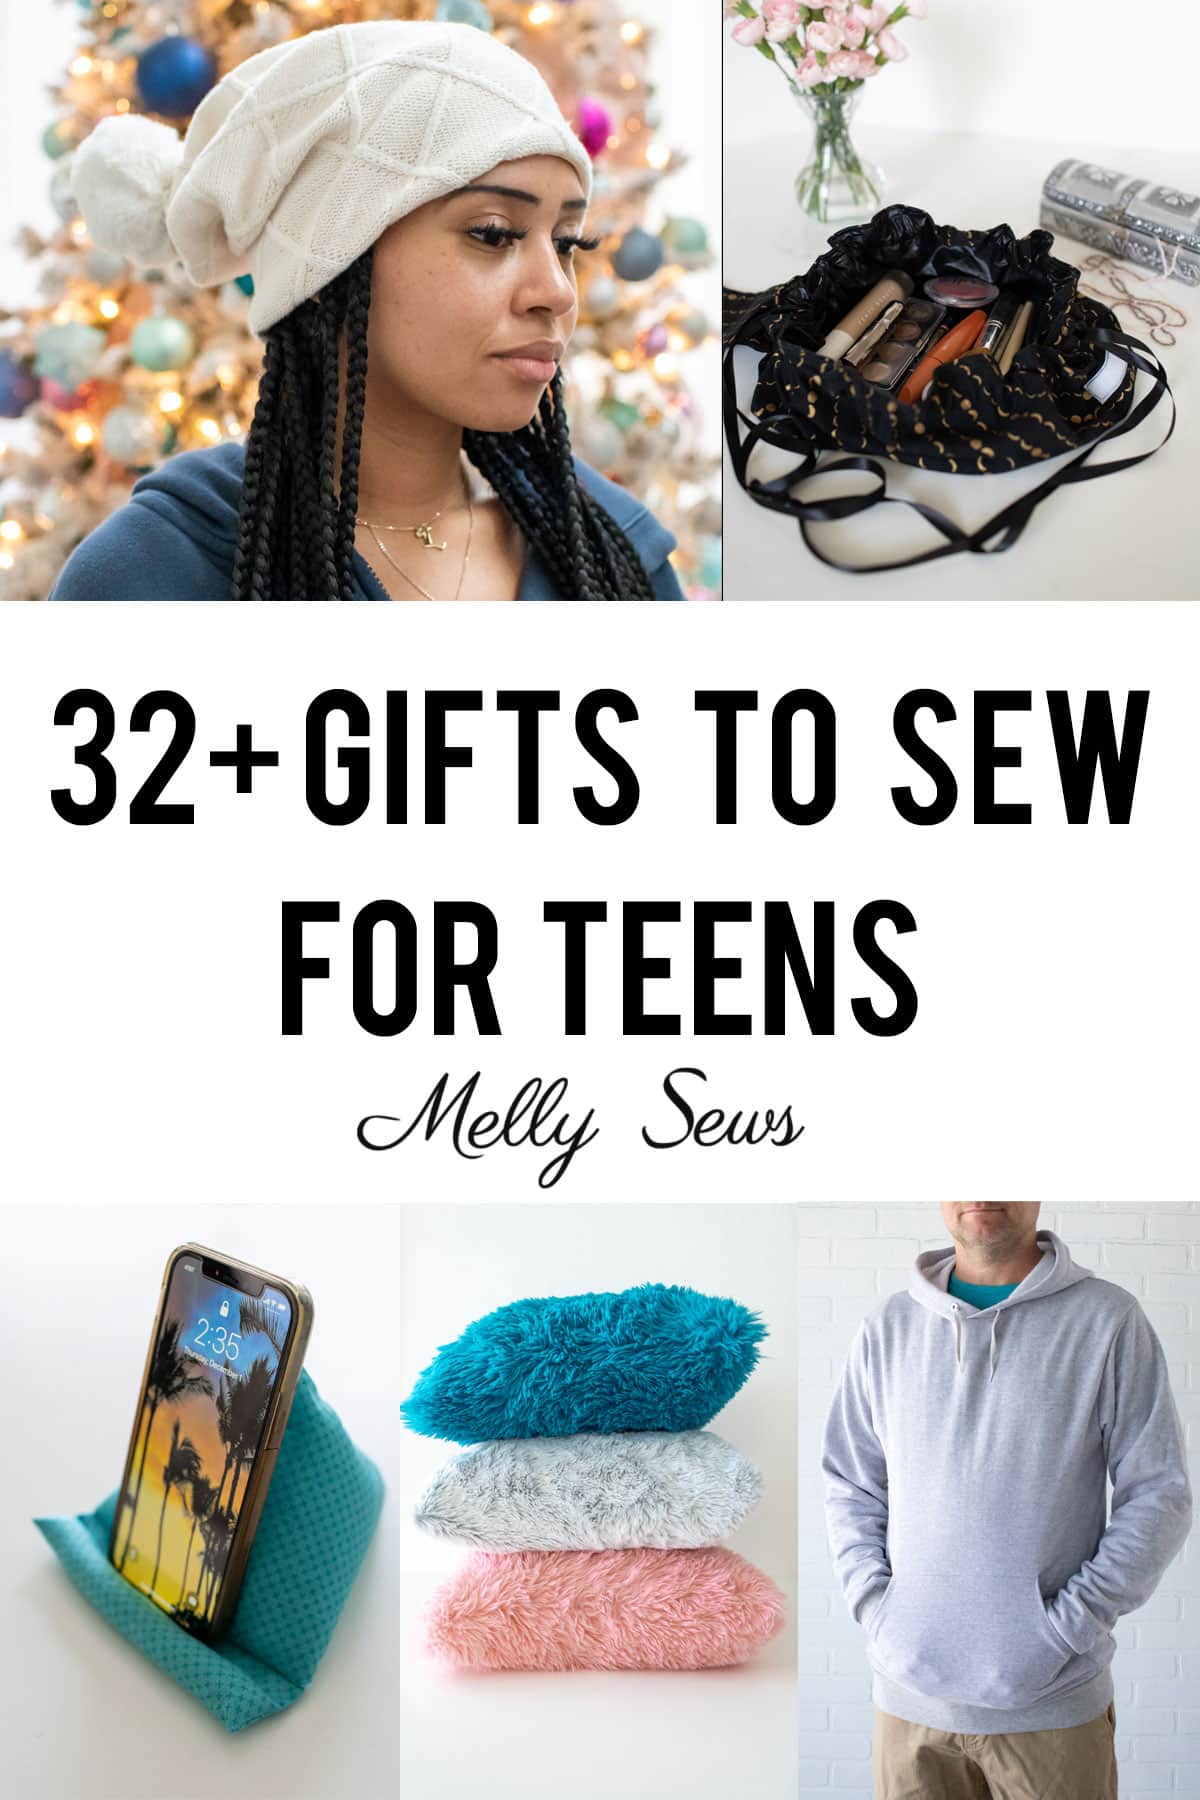 32+ Gifts to Sew for Teens: Sewing Projects to Make Teen Gifts - Melly Sews